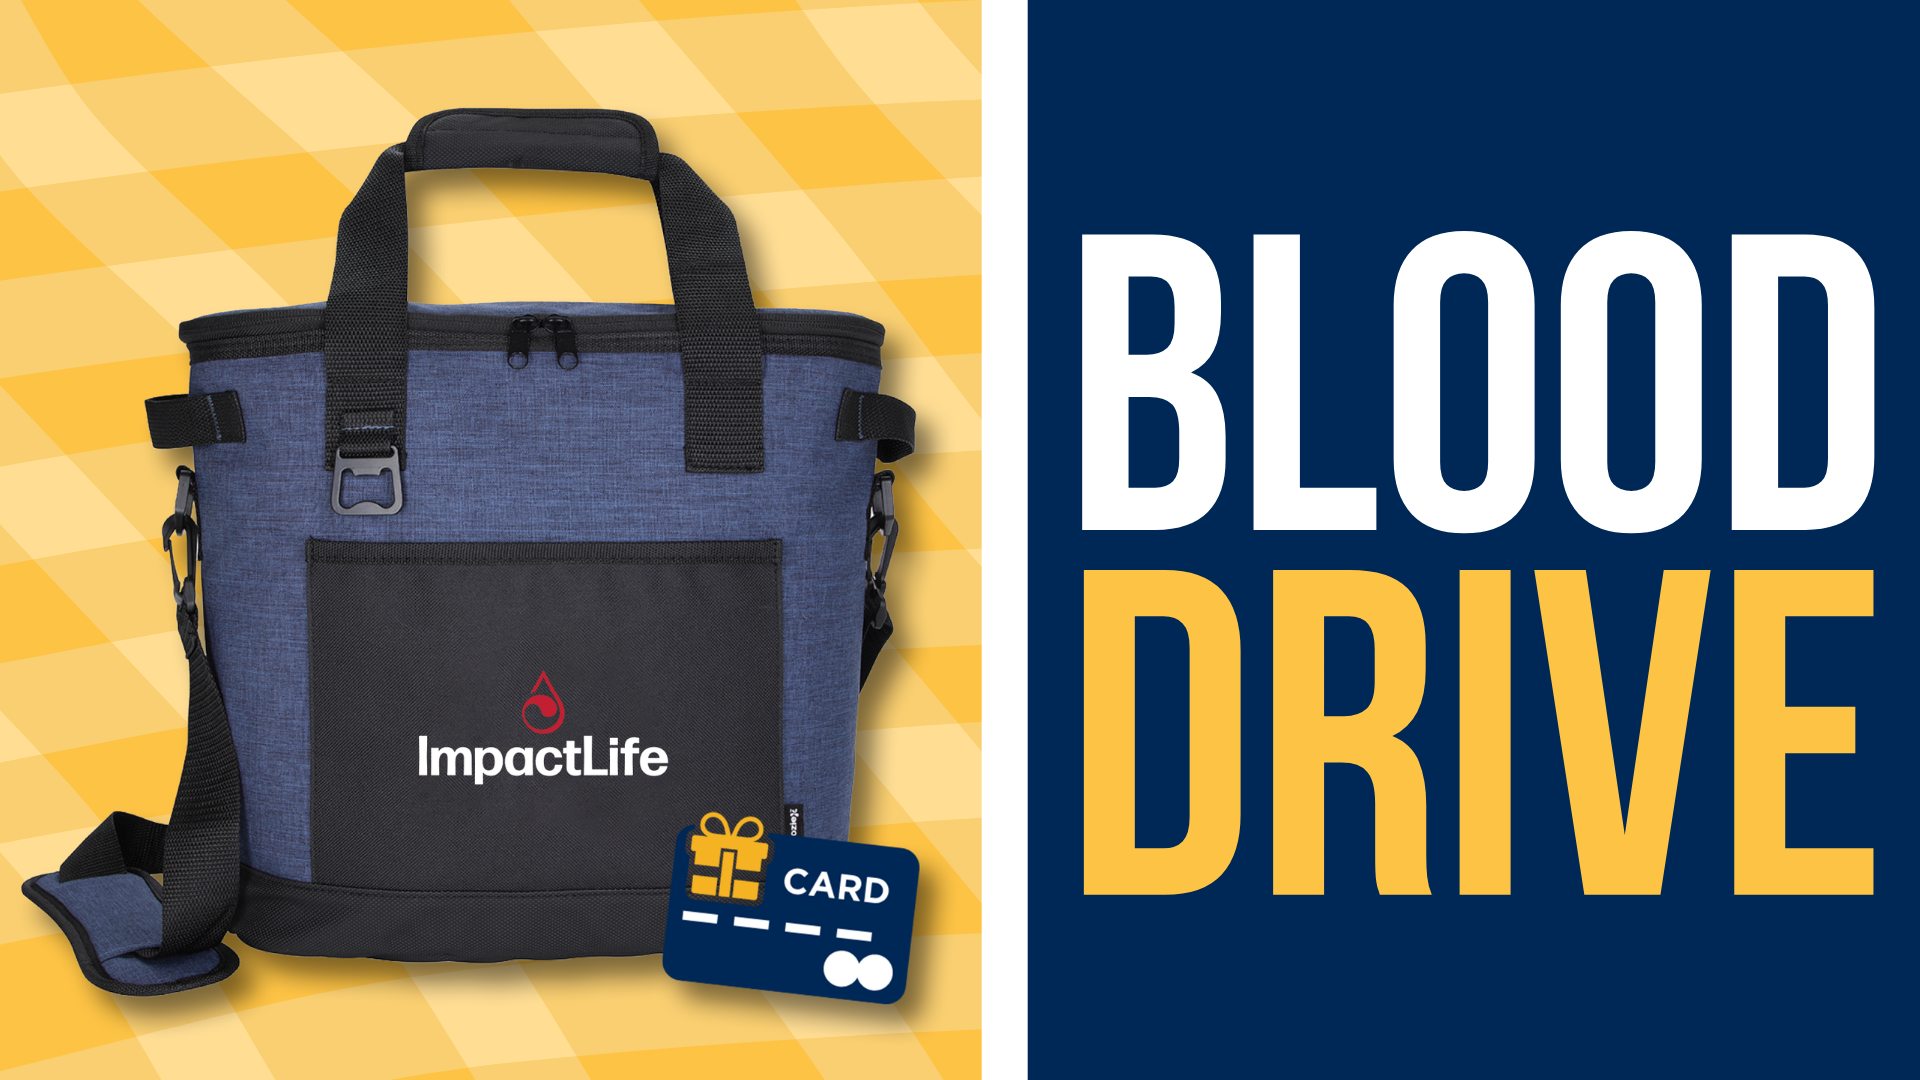 A blue and yellow background with a picture of a branded Impact Life soft cooler and a graphic of a generic gift card on the left side. On the right side, large text says Blood Drive.